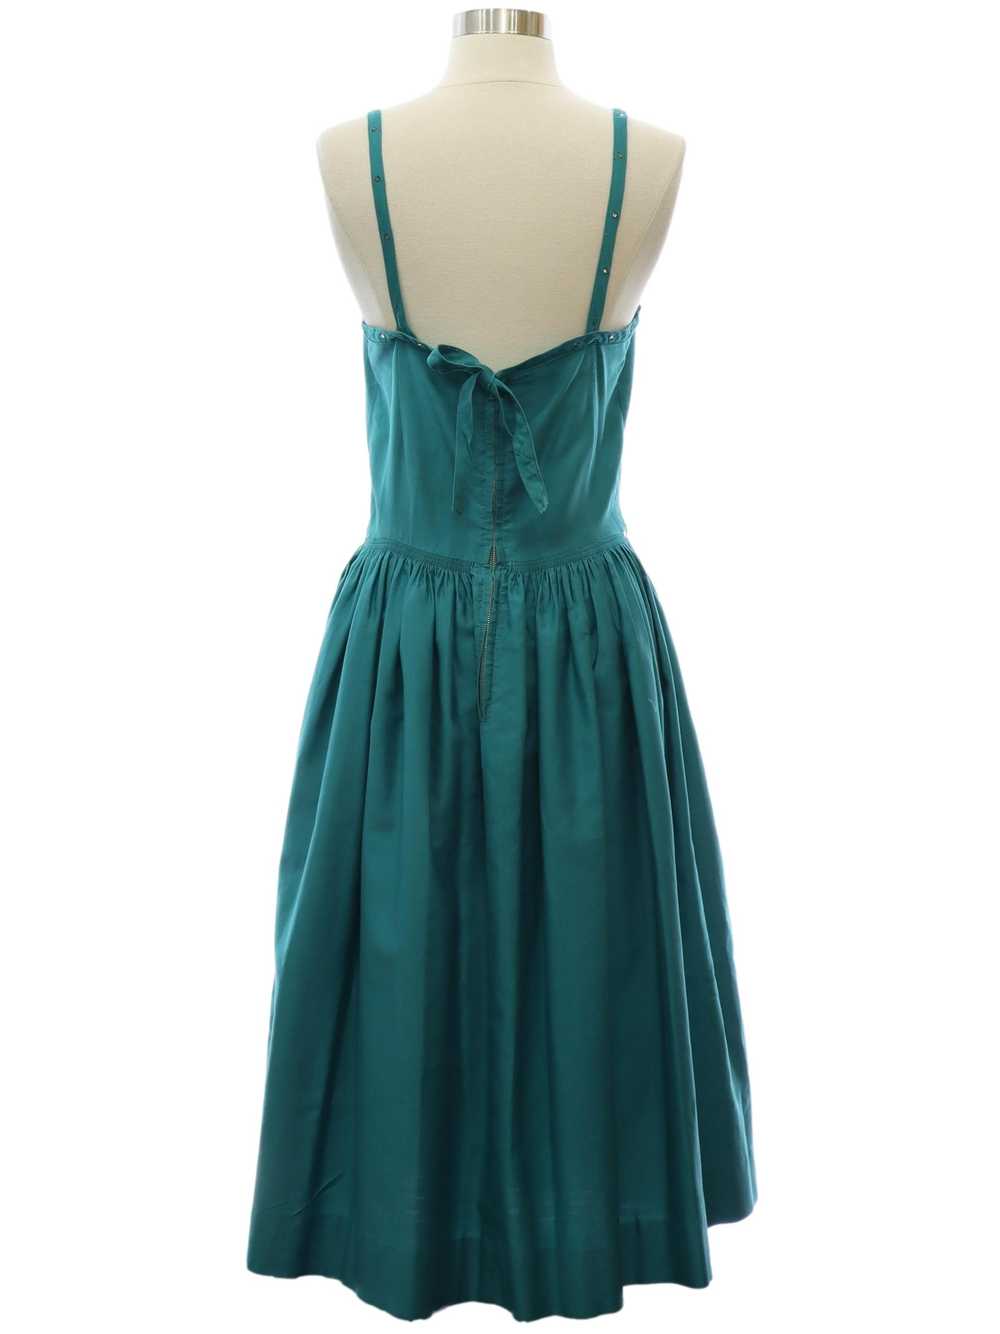 1960's Harford Frock Prom Or Cocktail Dress - image 3